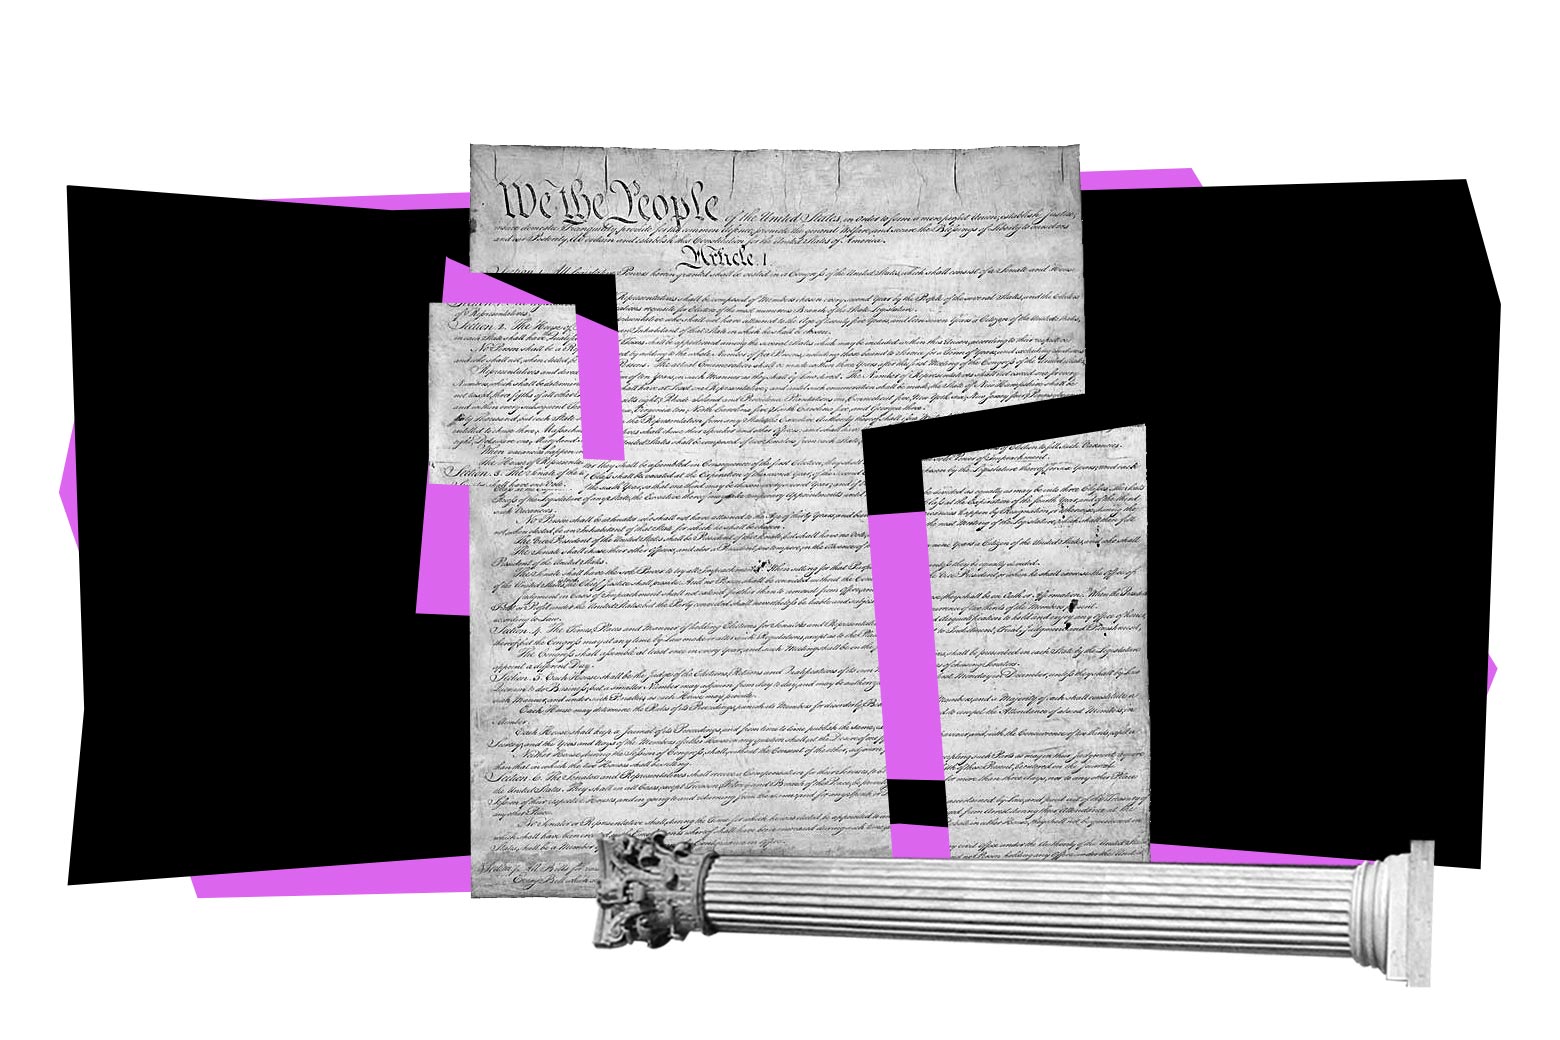 A collapsed column below a cut-up copy of the Constitution. 